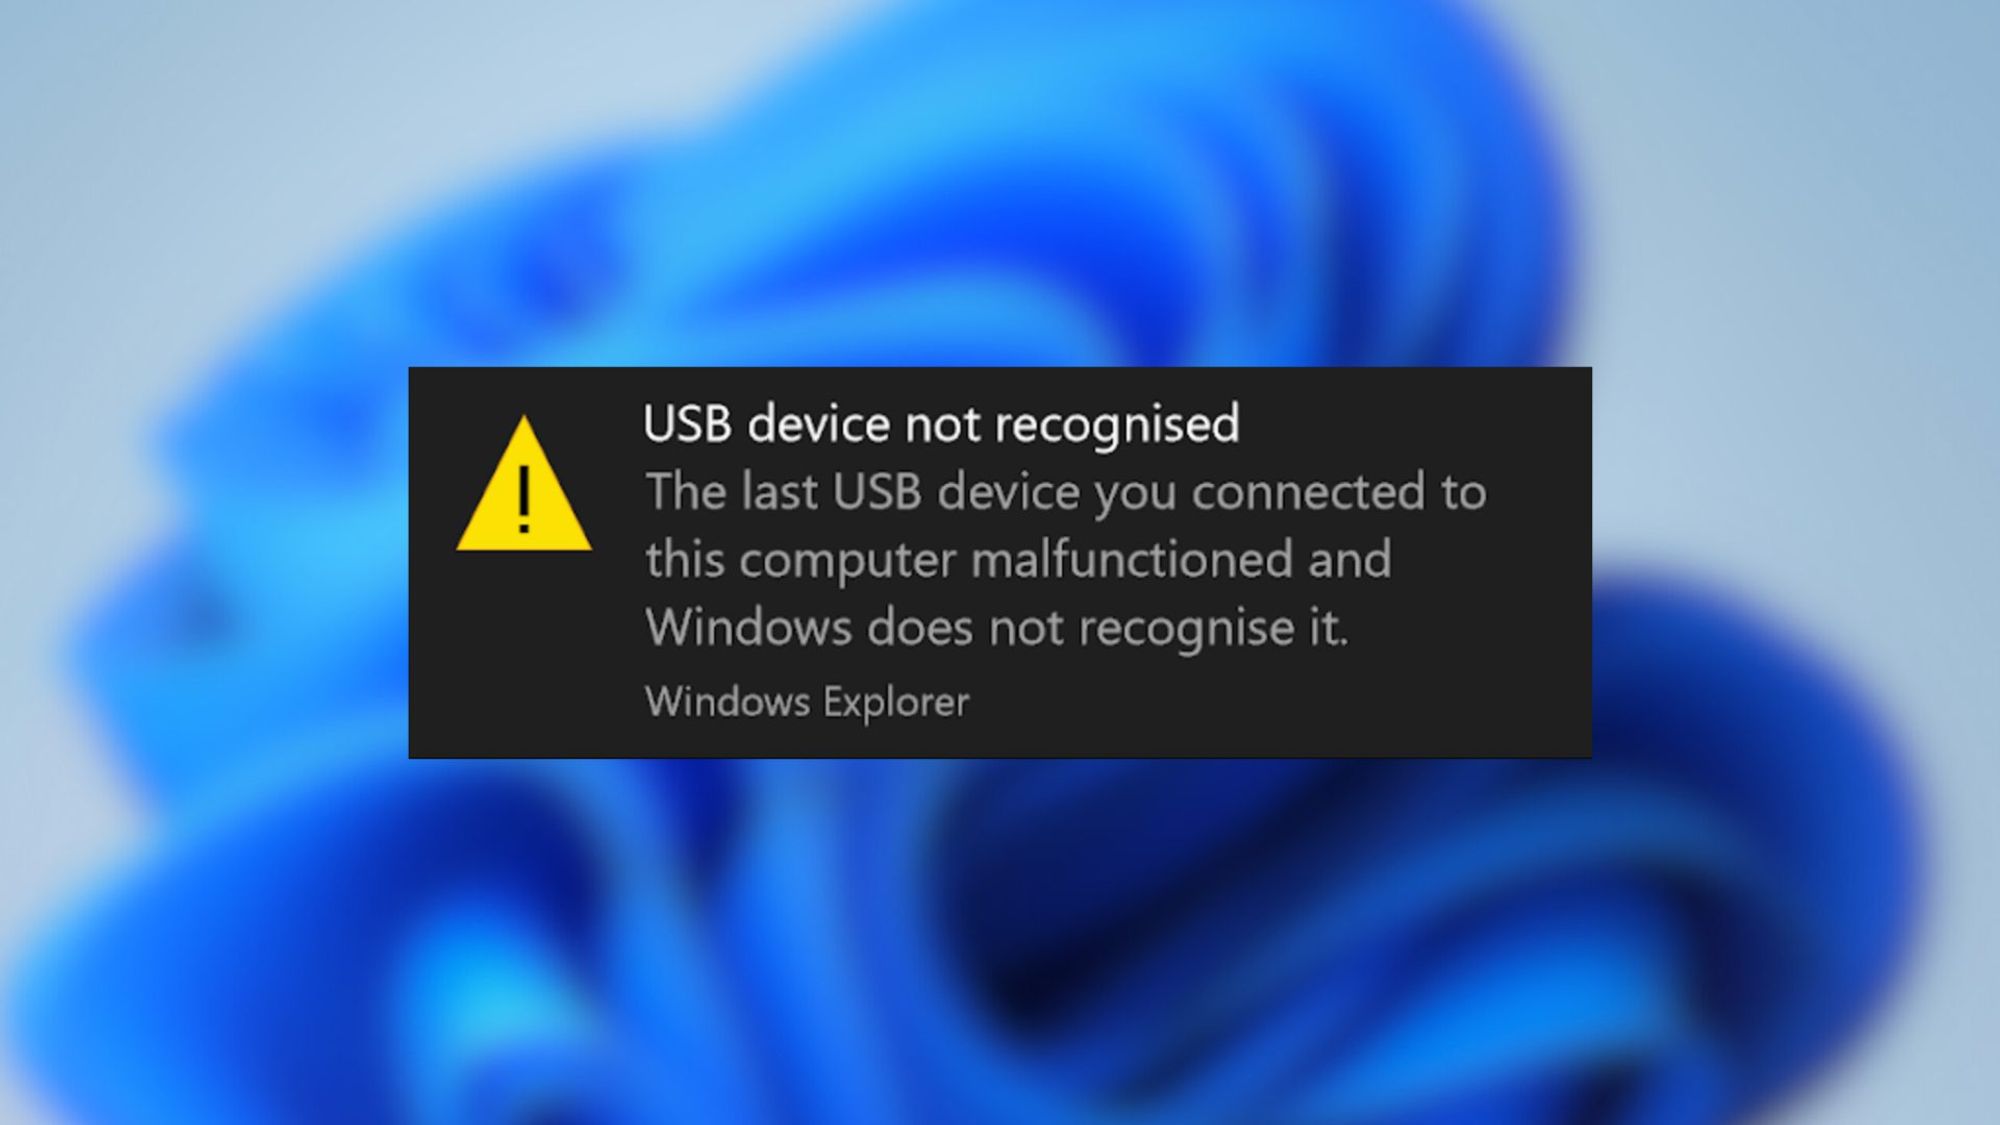 How to Fix USB Device Not Recognized on Windows [12 Methods]